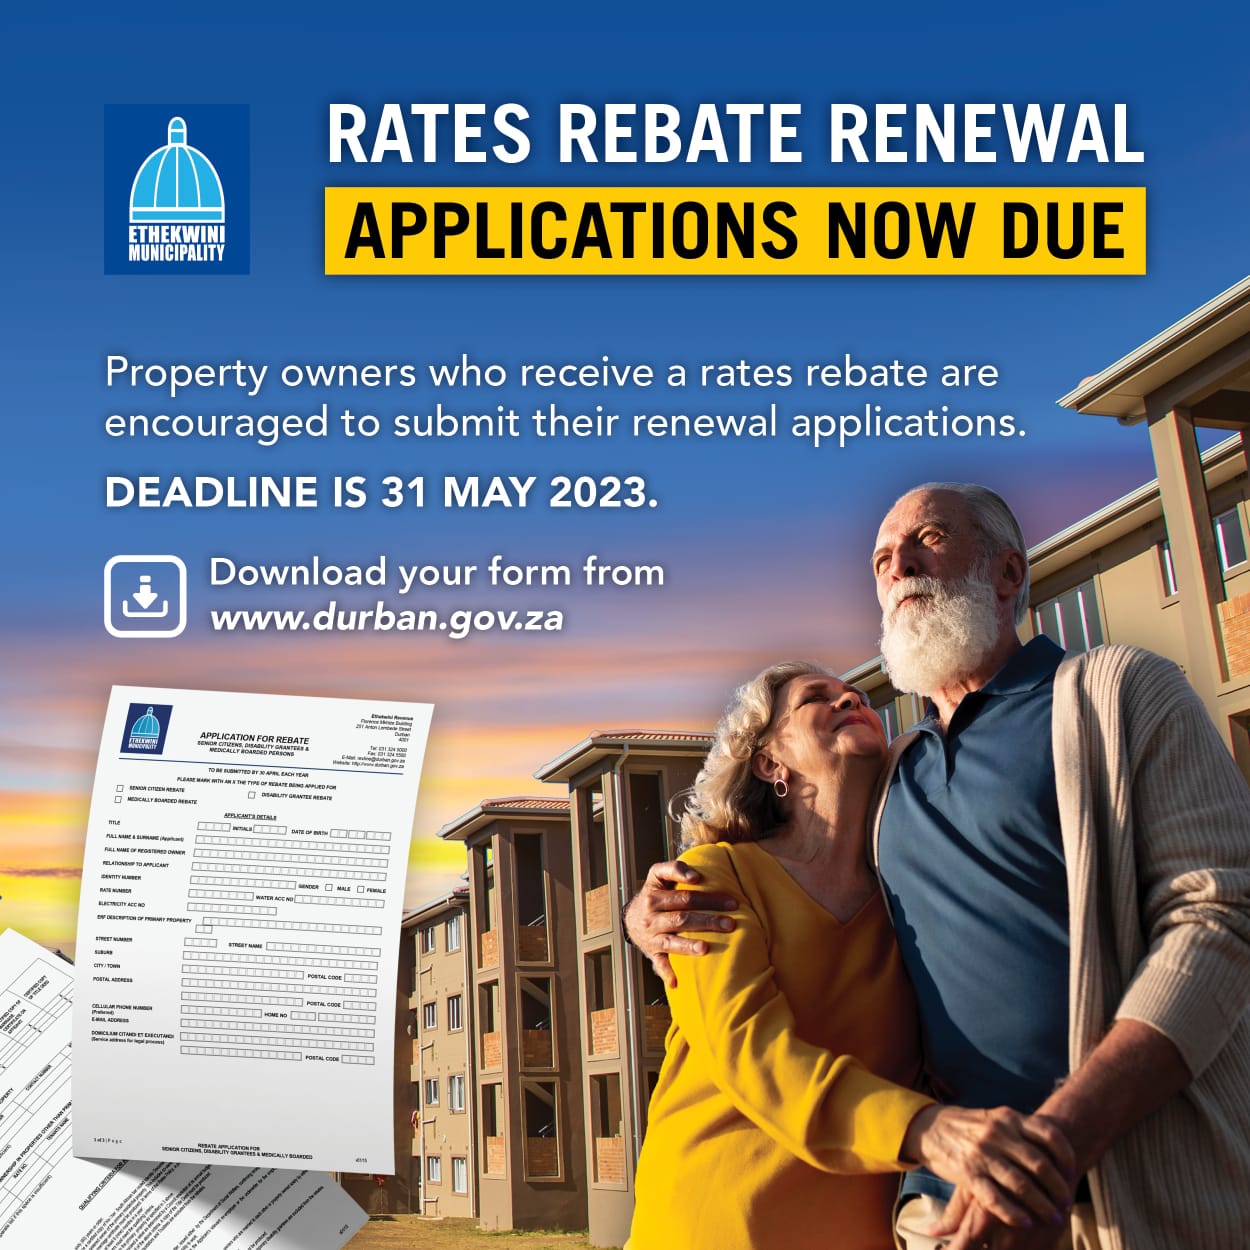 ethekwini-municipality-on-twitter-the-city-has-extended-the-rates-rebate-renewal-application